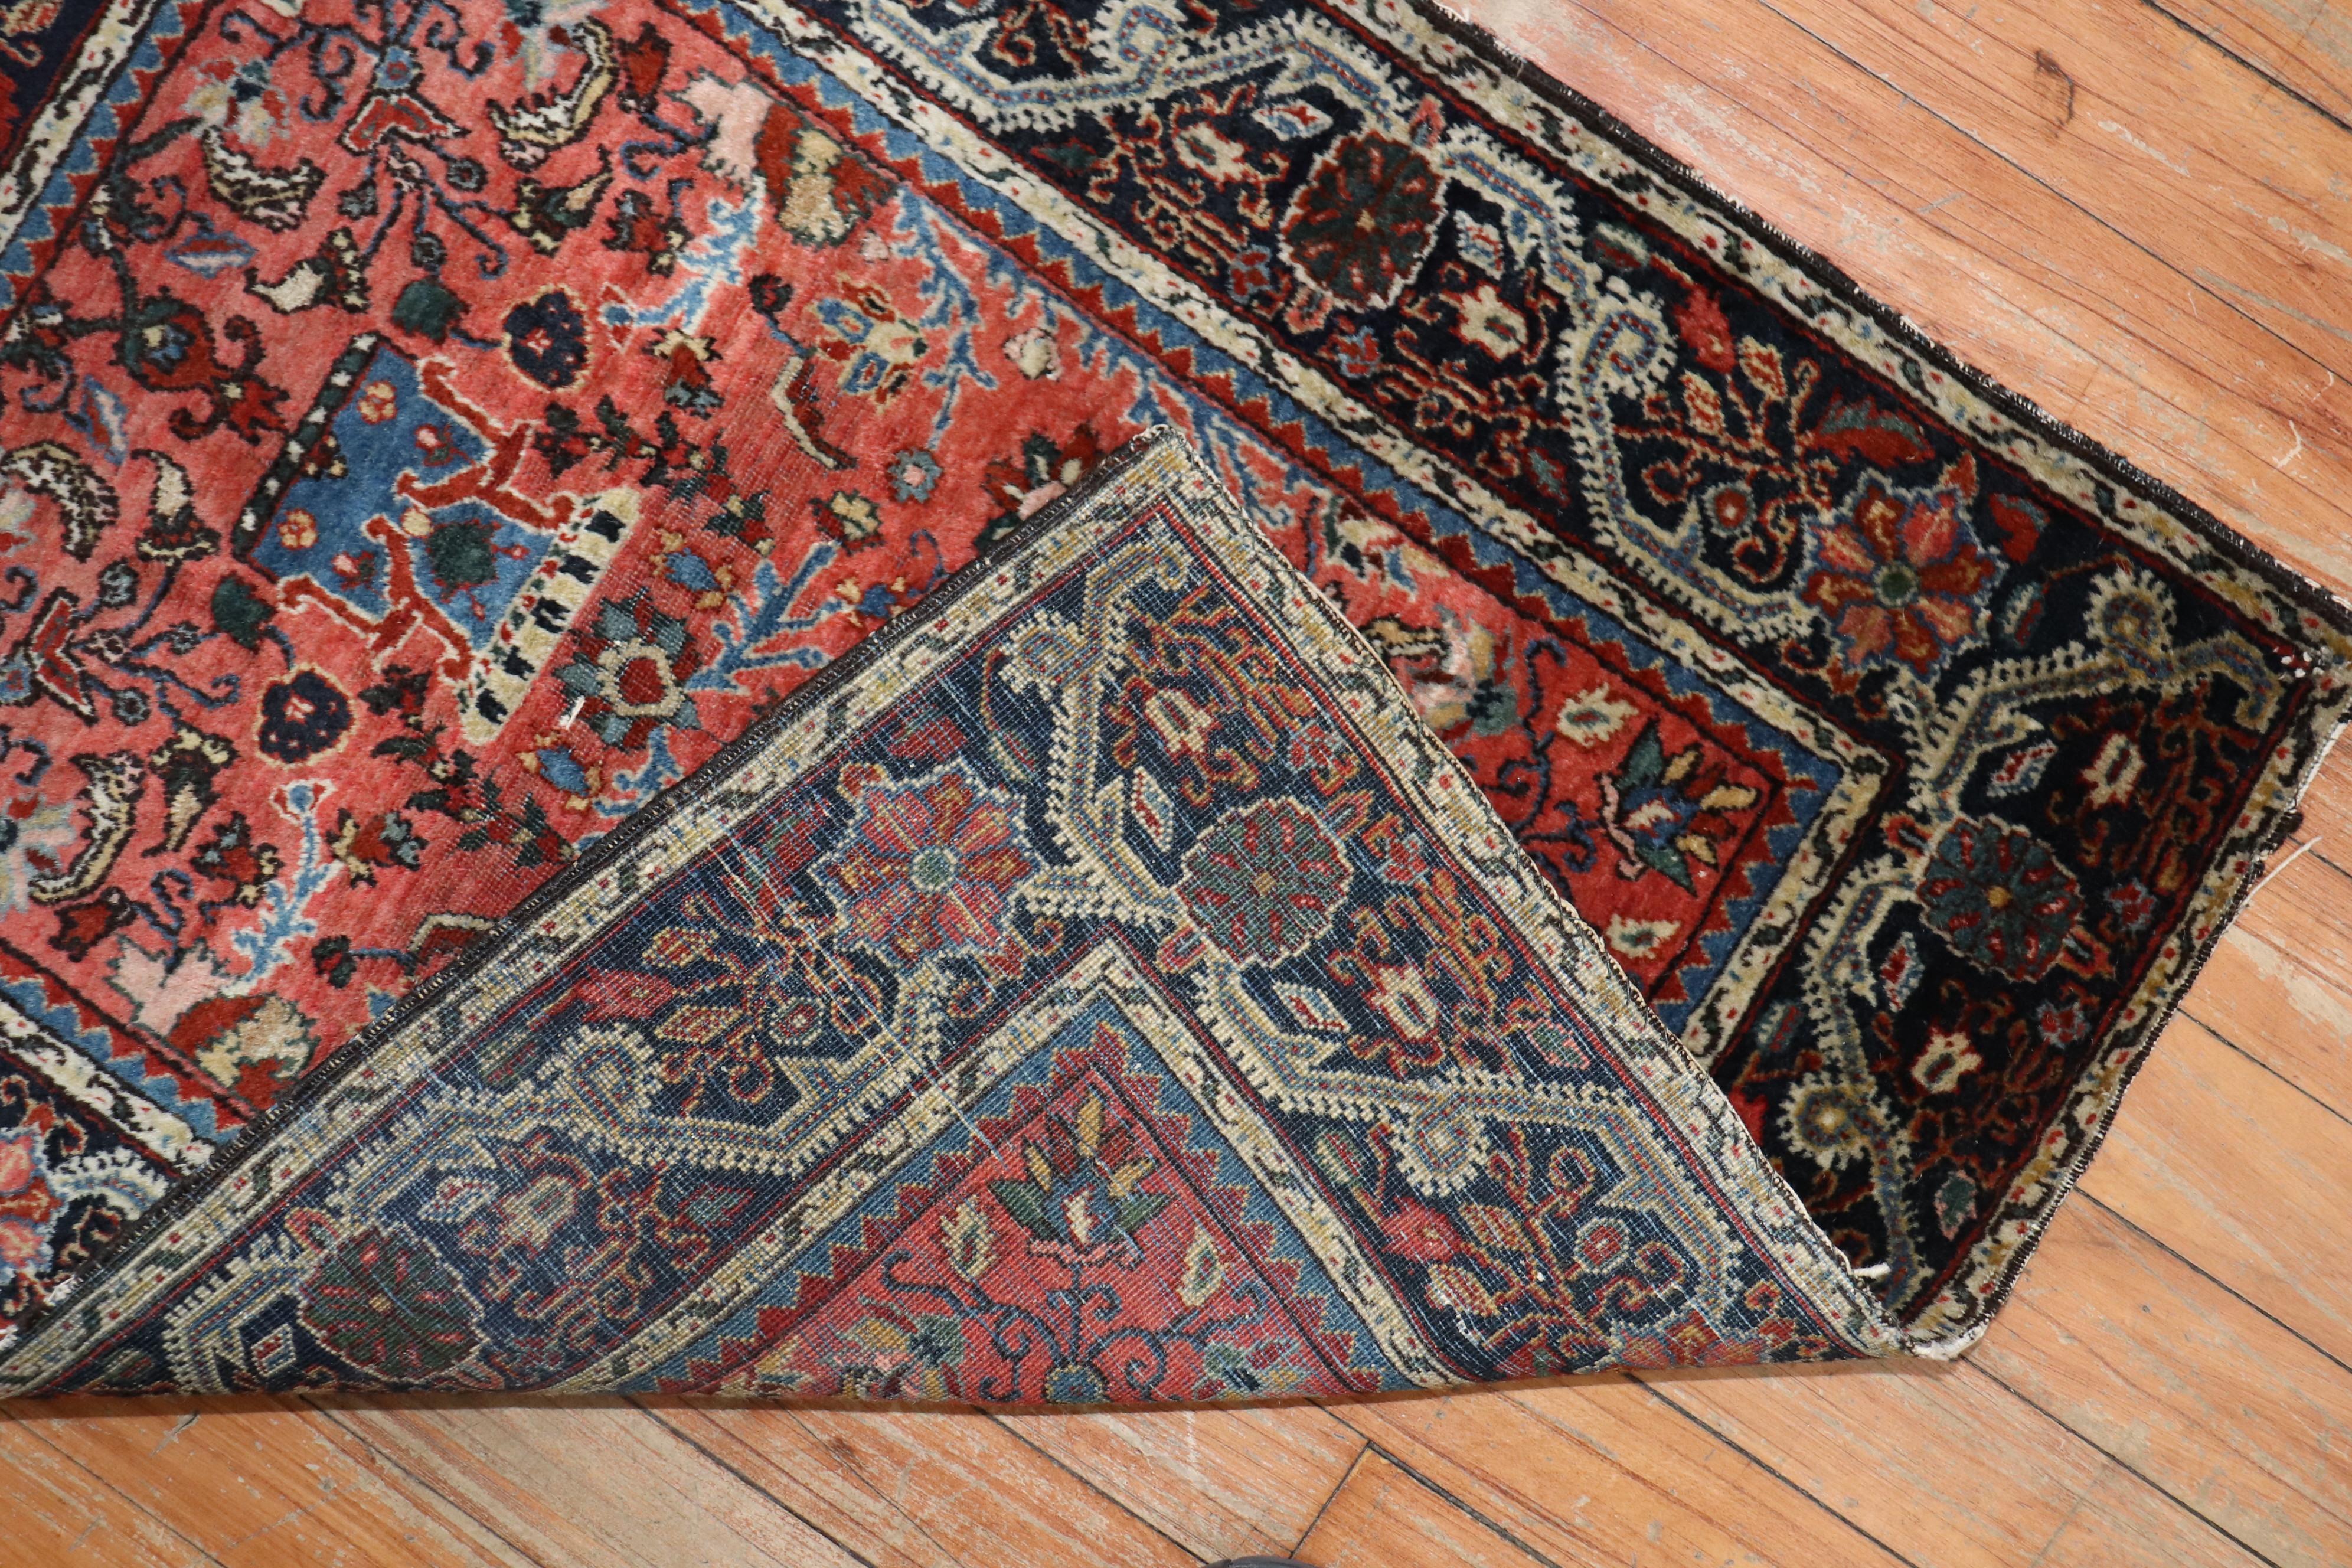 An early 20th century high collectible Jozan Sarouk rug with an ornate palette in rich brick red and navy tones

Measures: 2' x 2'7”.

 